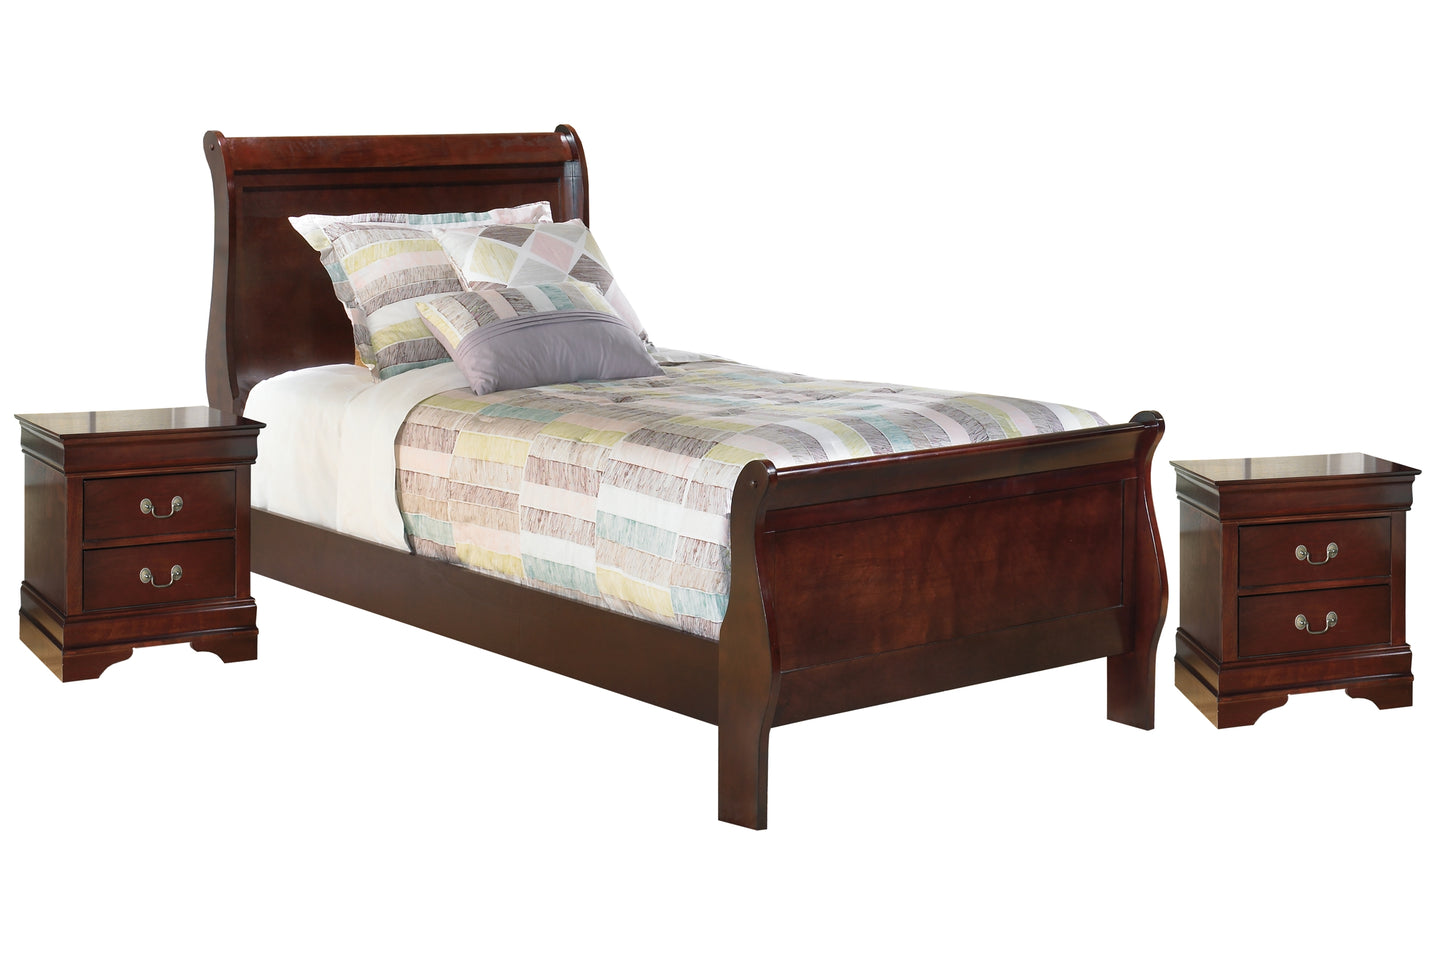 Alisdair Twin Sleigh Bed with 2 Nightstands Signature Design by Ashley®